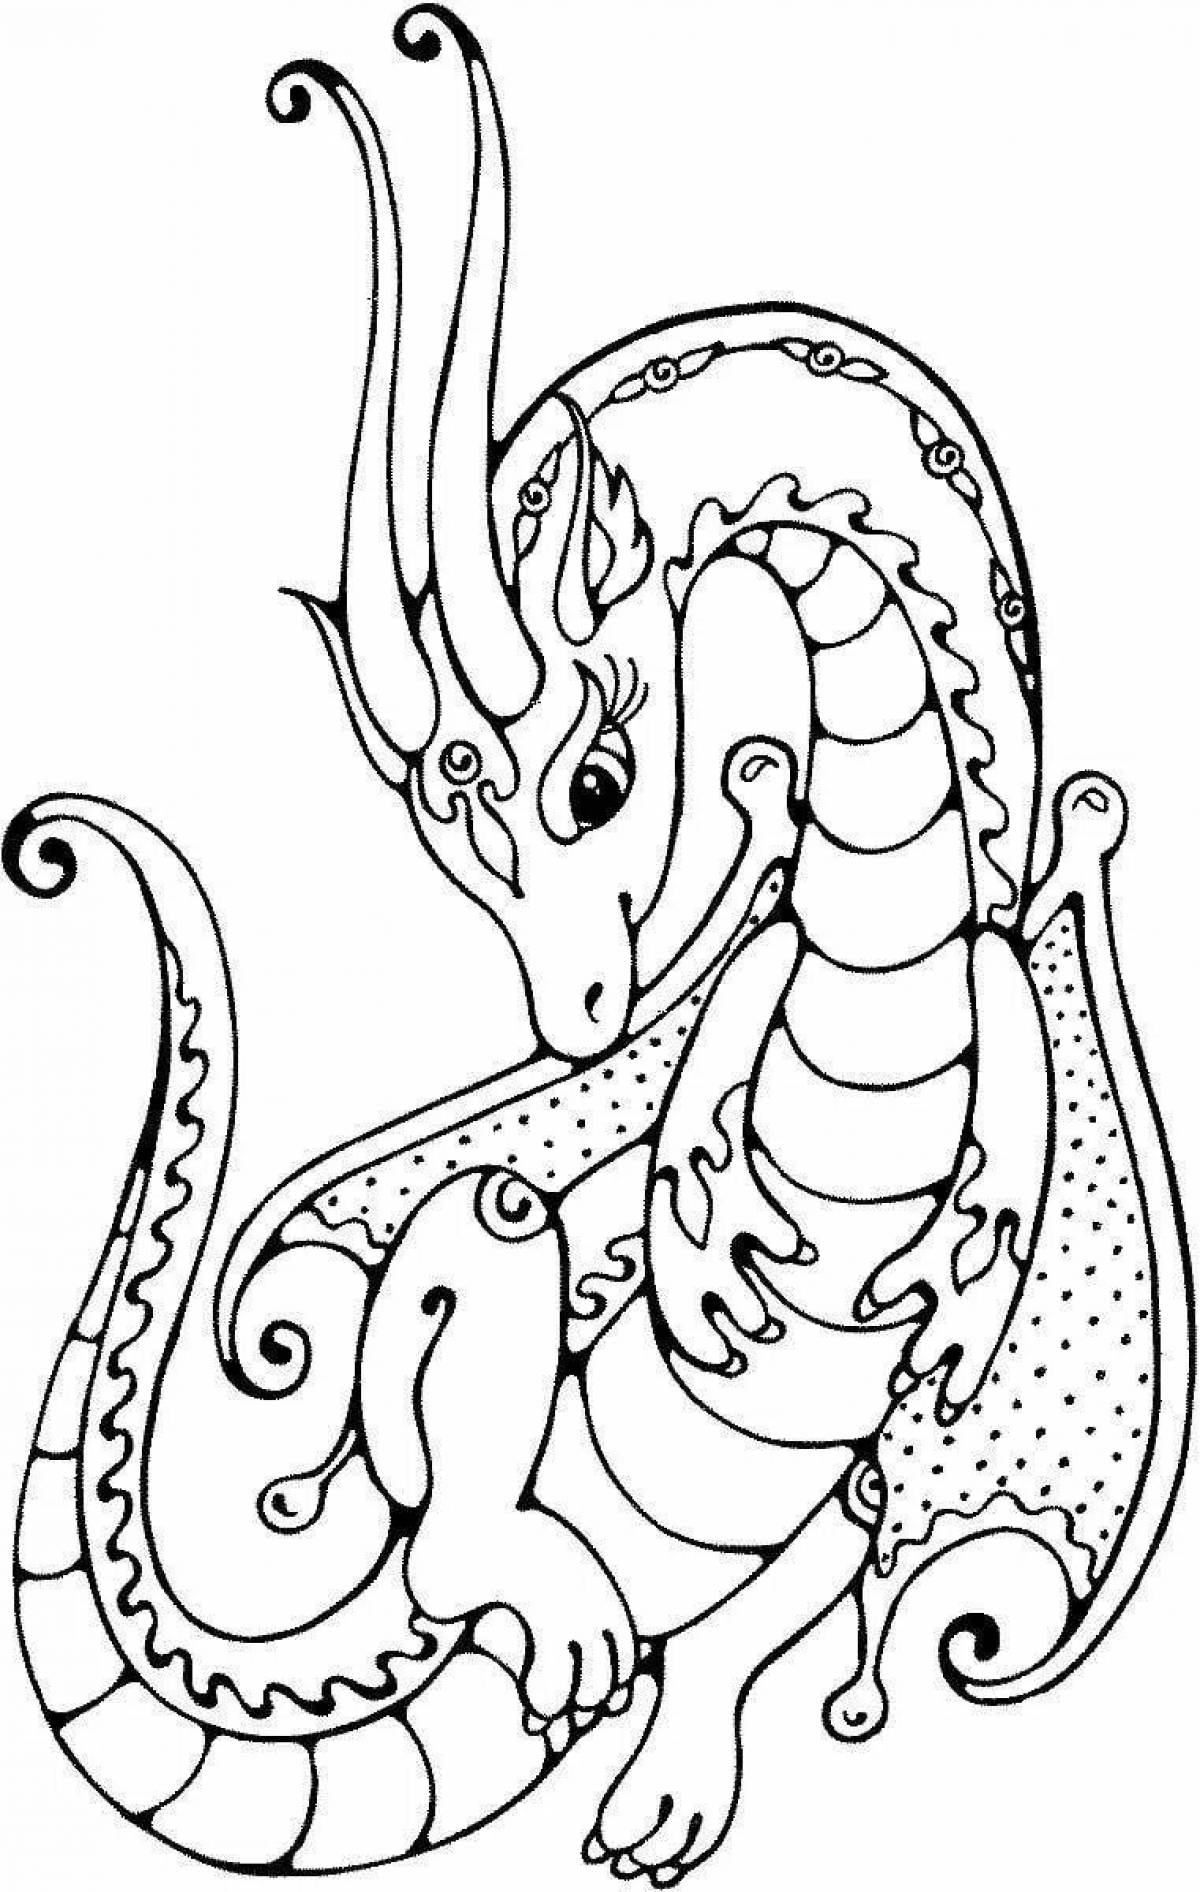 Luxury magic dragon coloring page